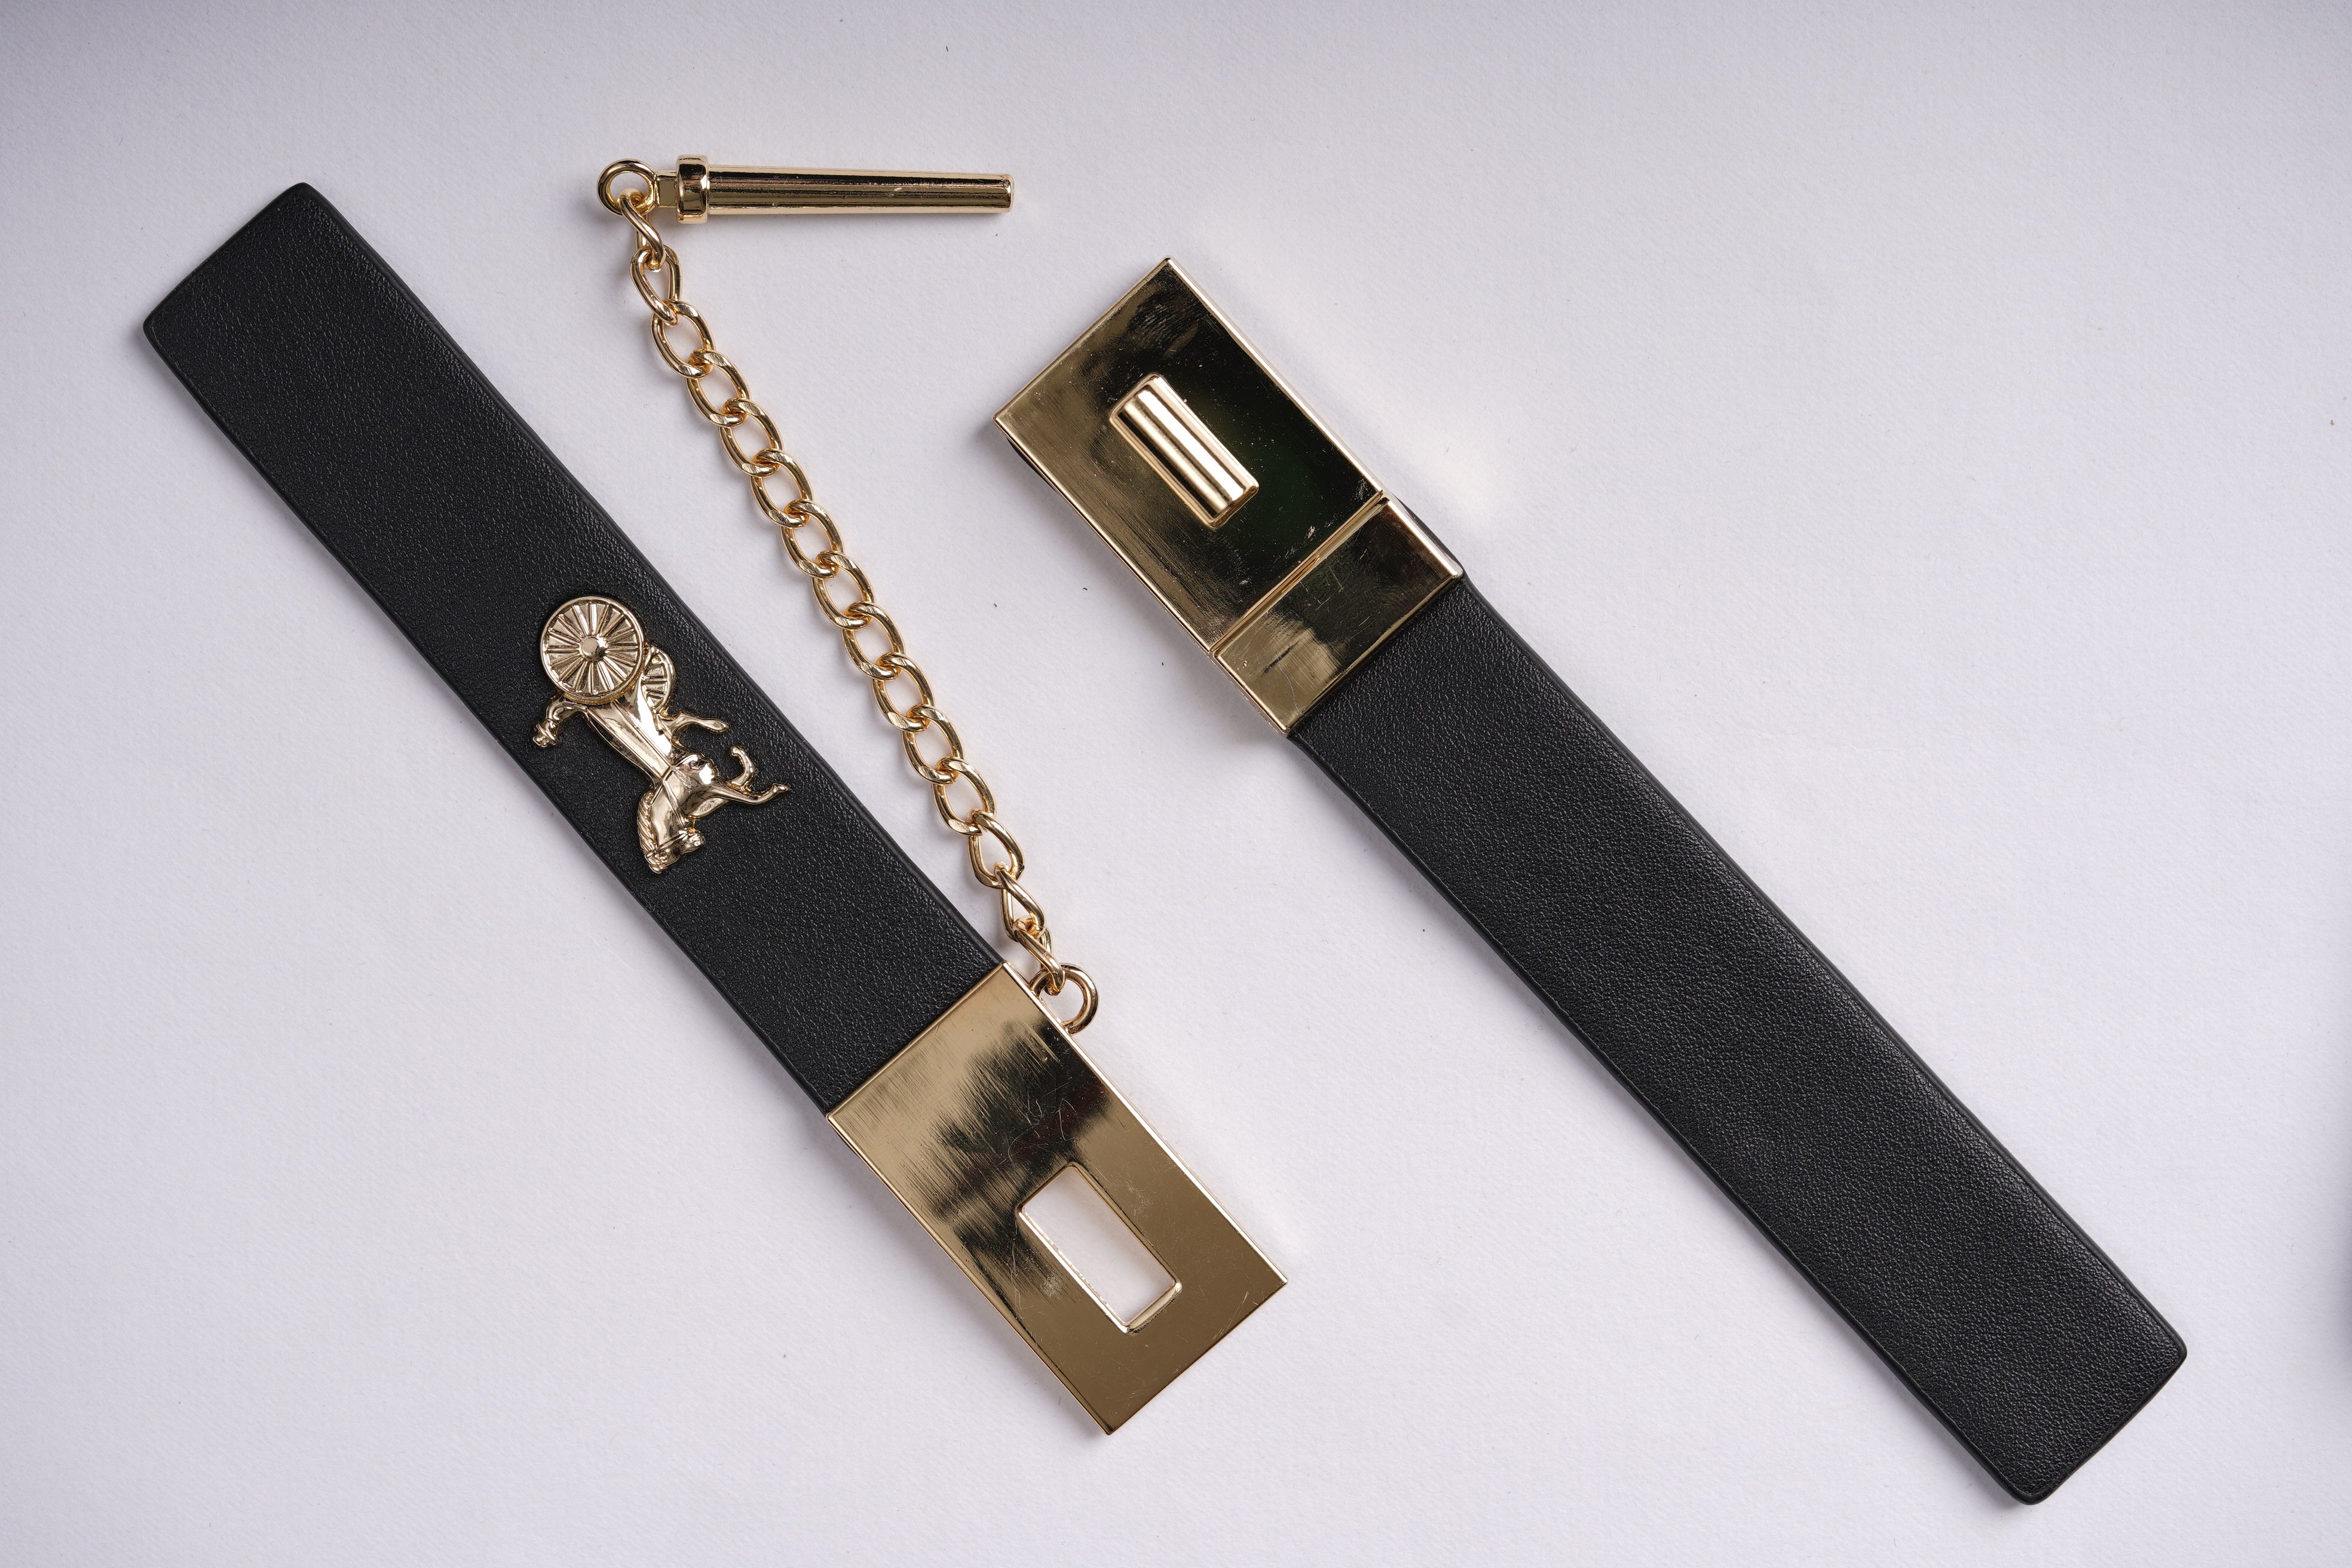 LUXURY STYLE 2 PART CLOSURE CLASP BELT WITH CHAIN LOCK